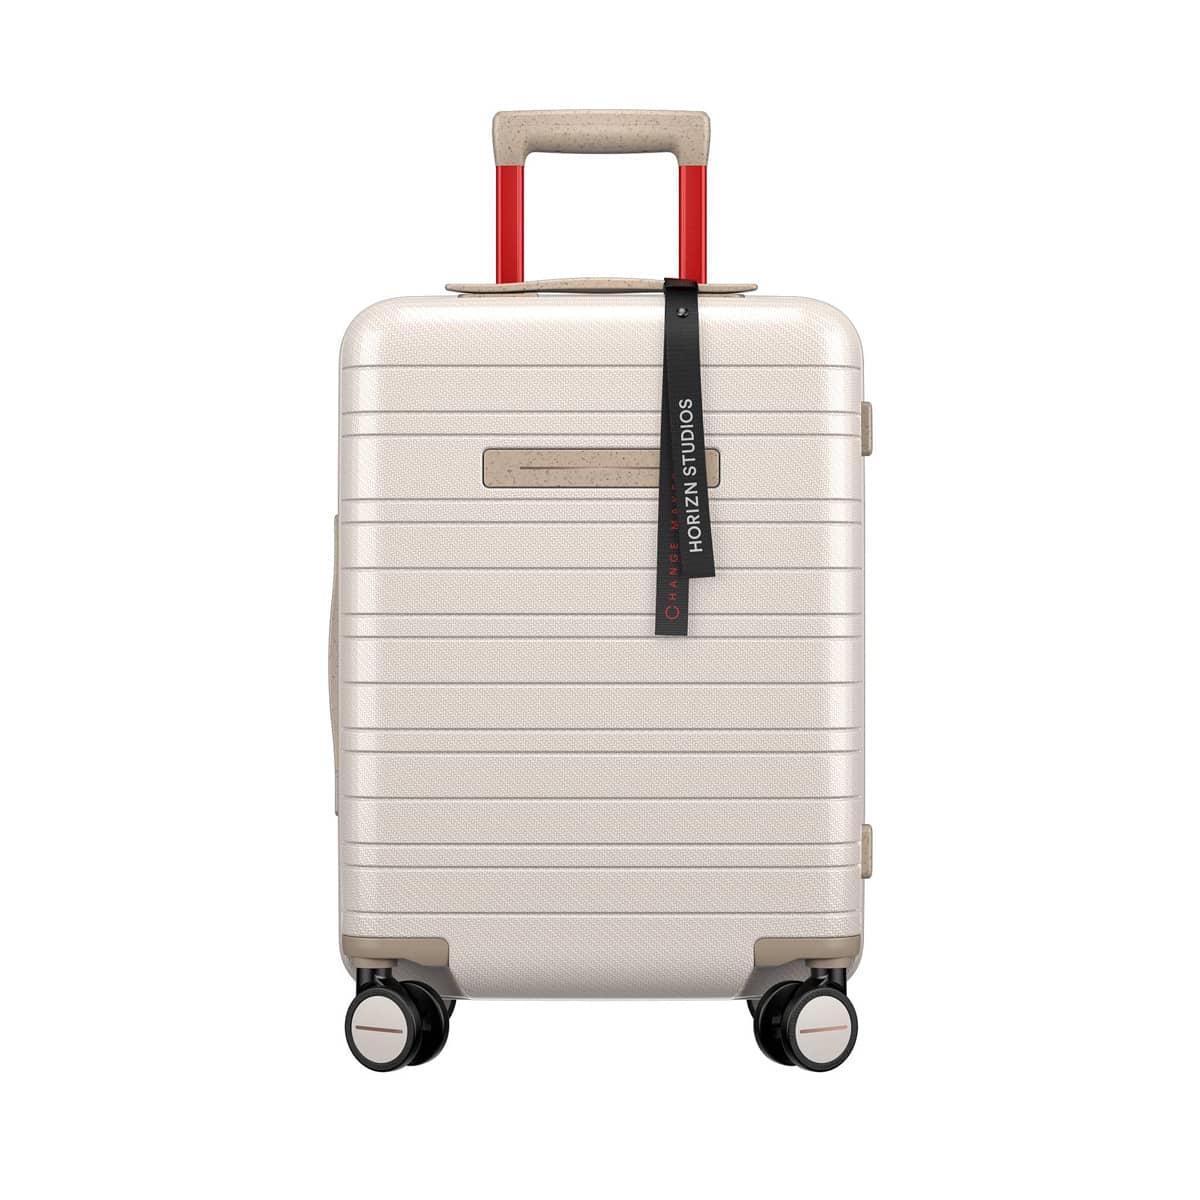 Luggage for Sustainable Travel